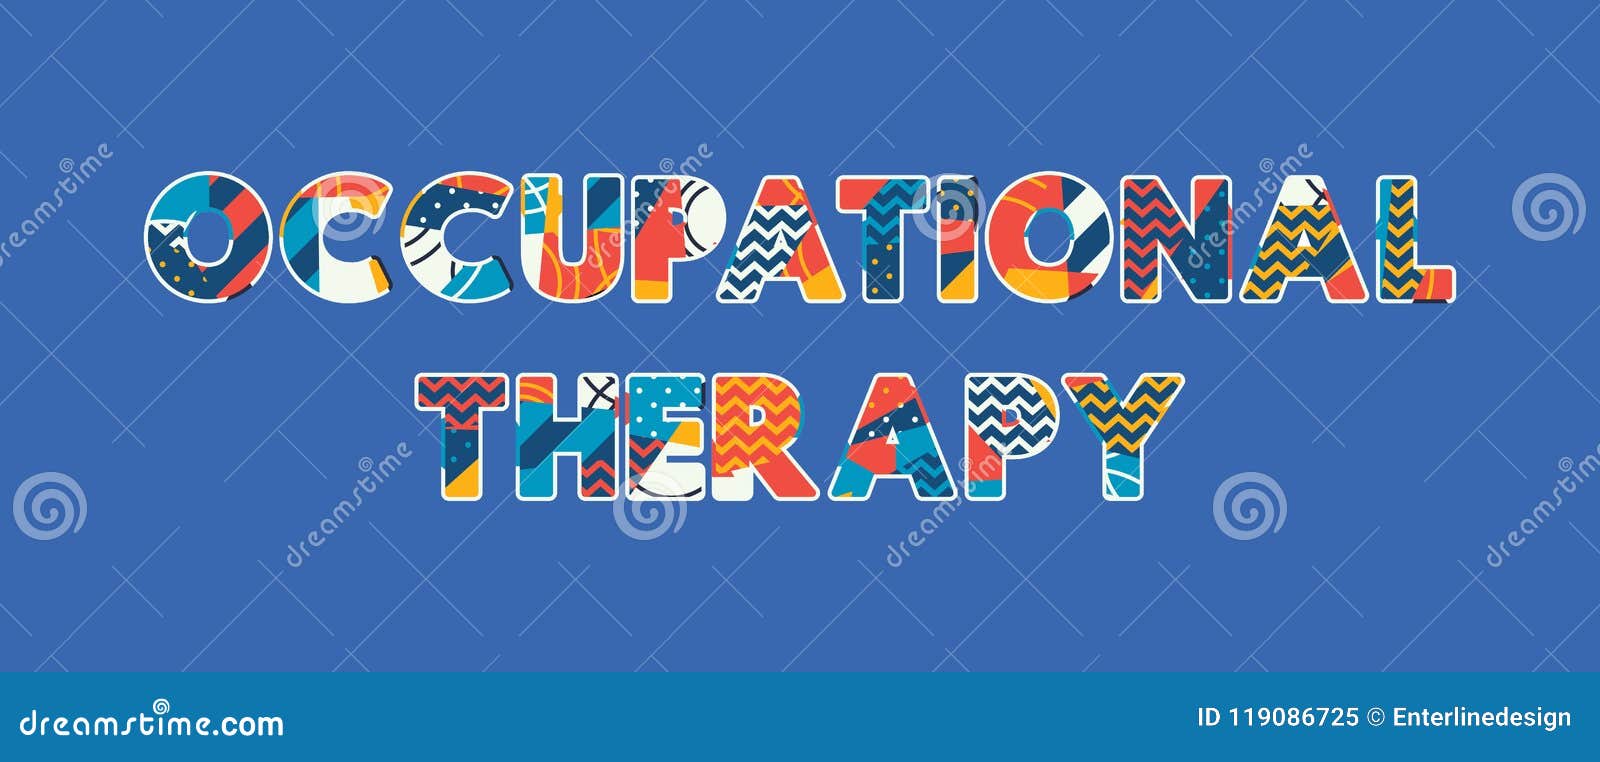 occupational therapy concept word art 